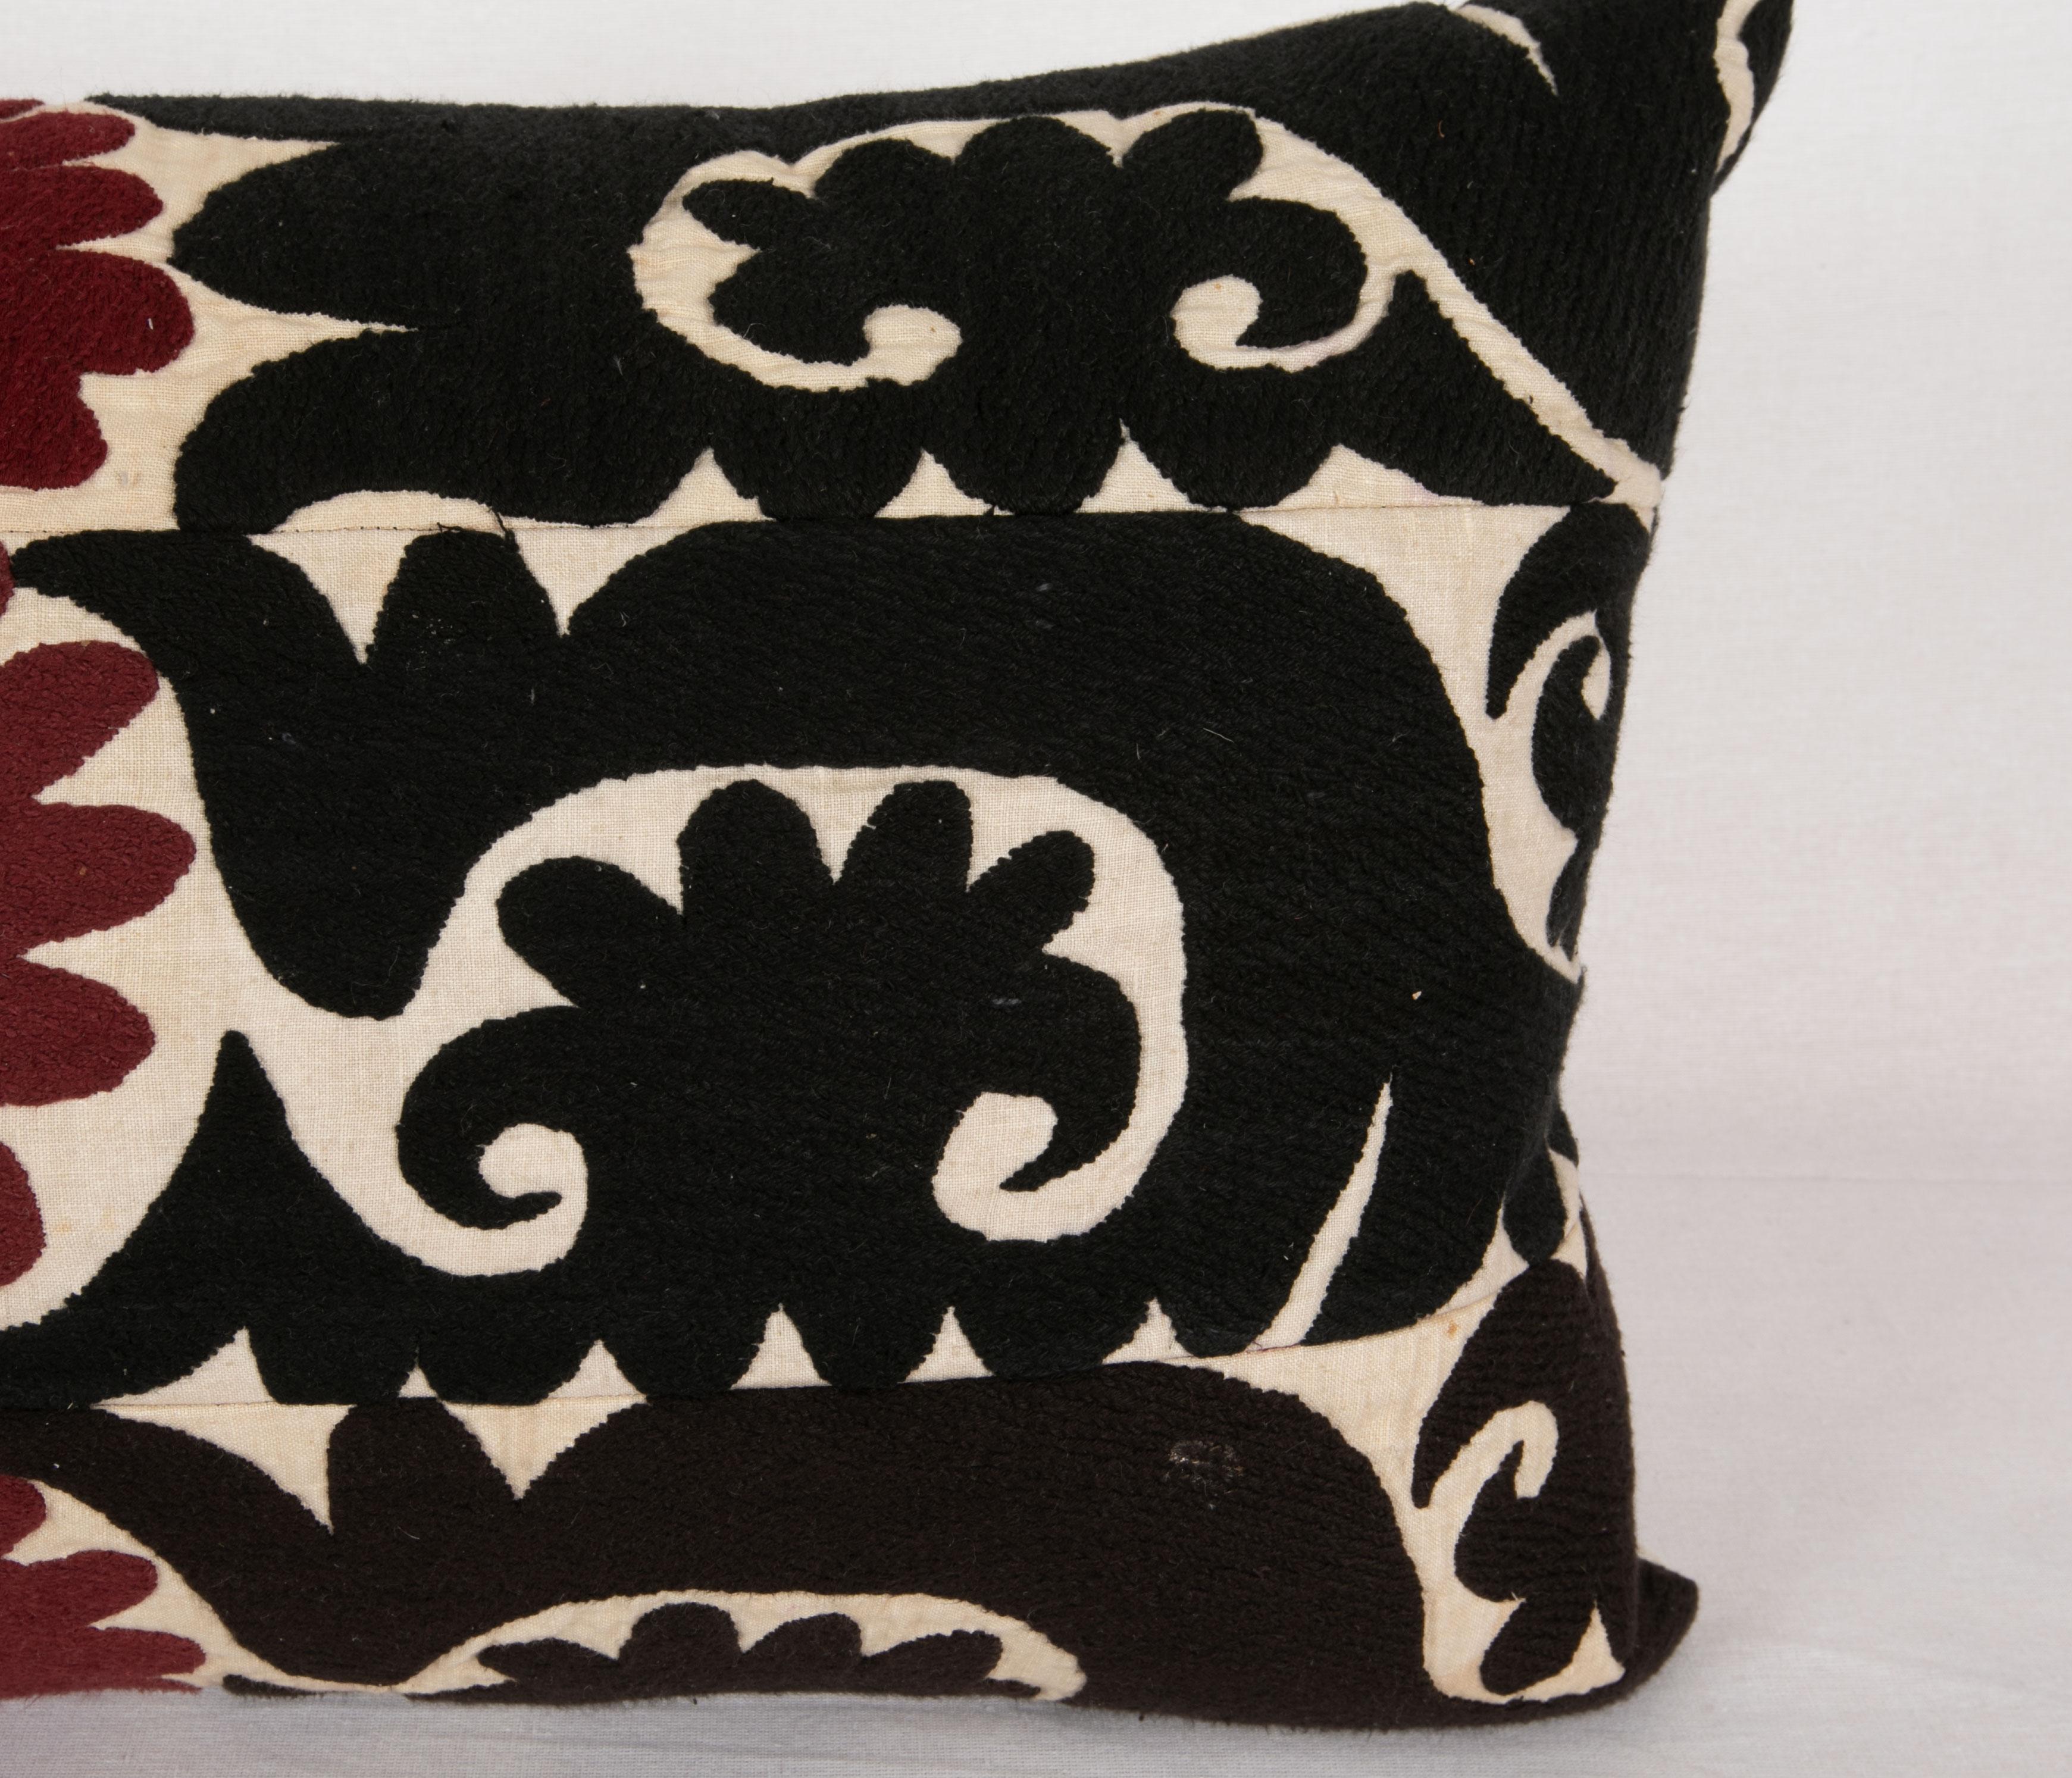 Cotton Suzani Pillow Case, Made from a mid 20th C. Uzbek Suzani For Sale